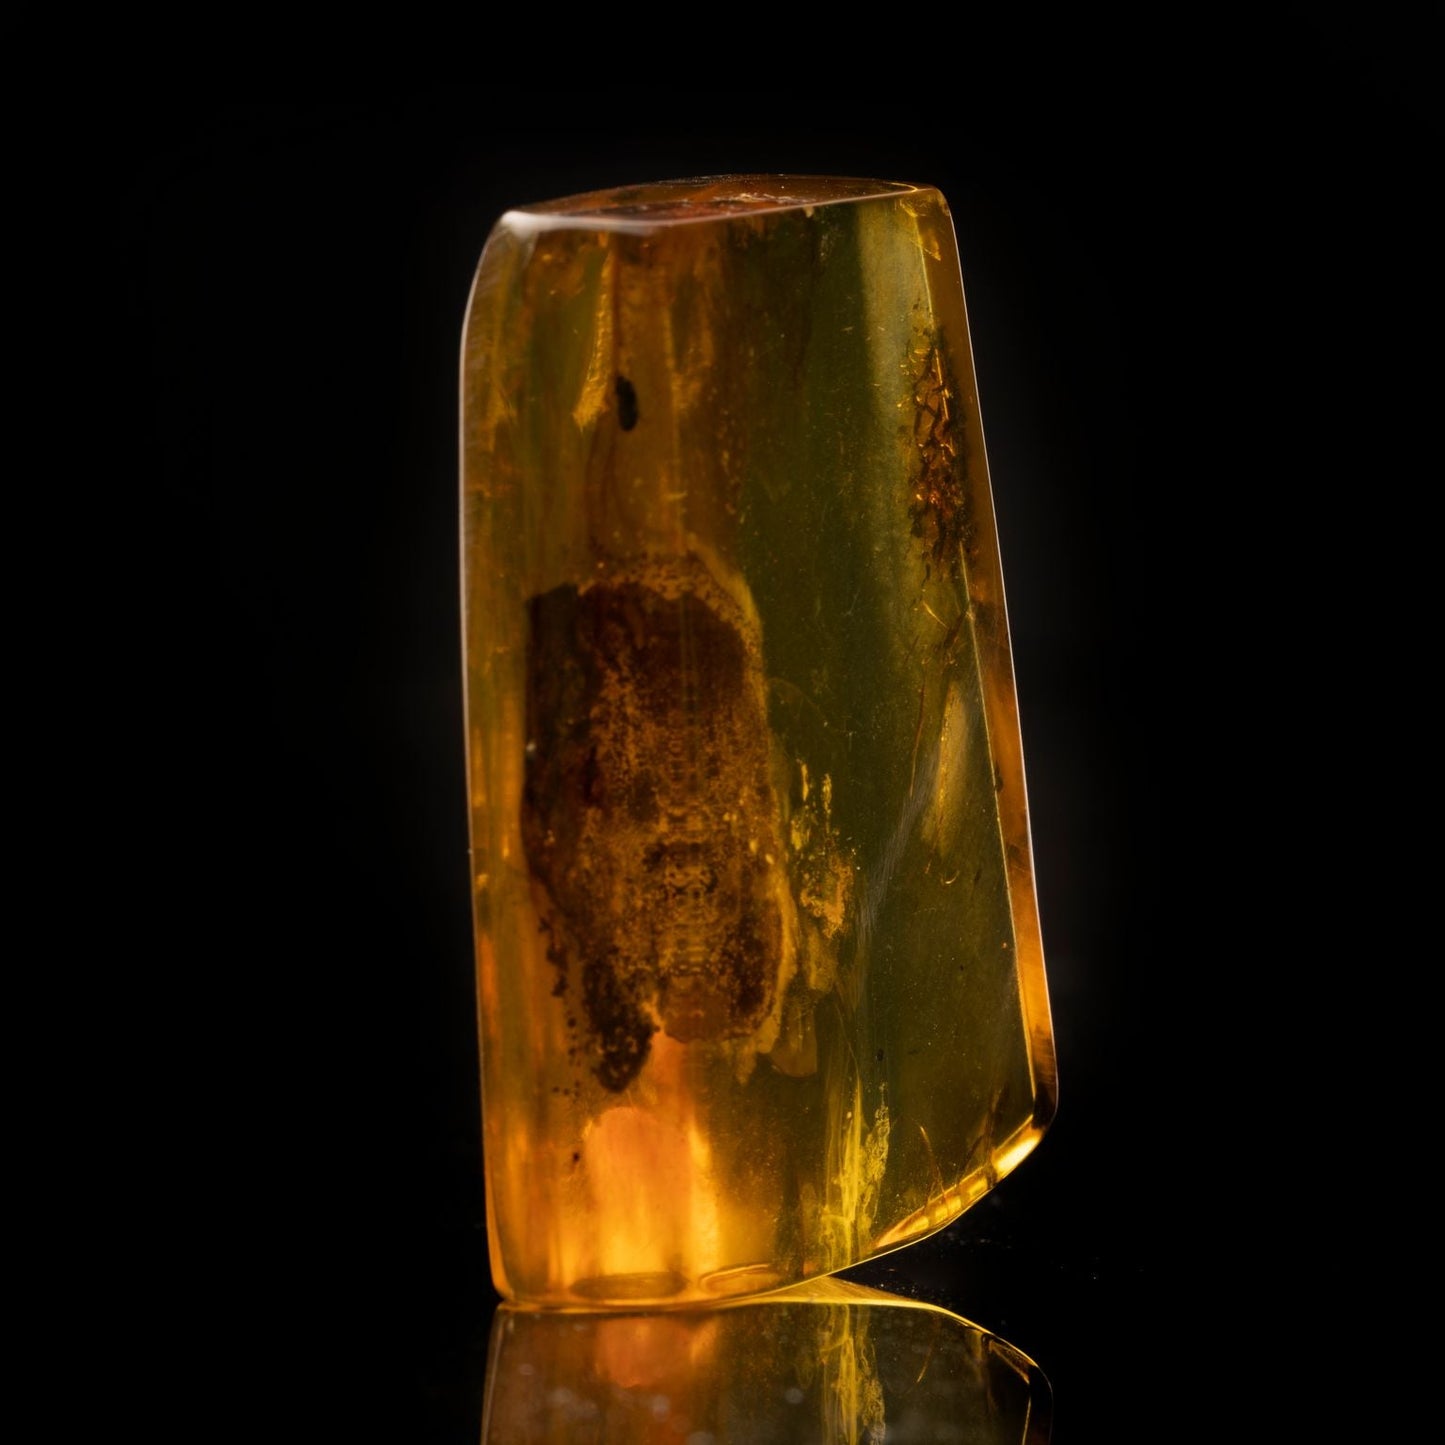 Baltic Amber with Termite, Ant, Gnat, and Leaf